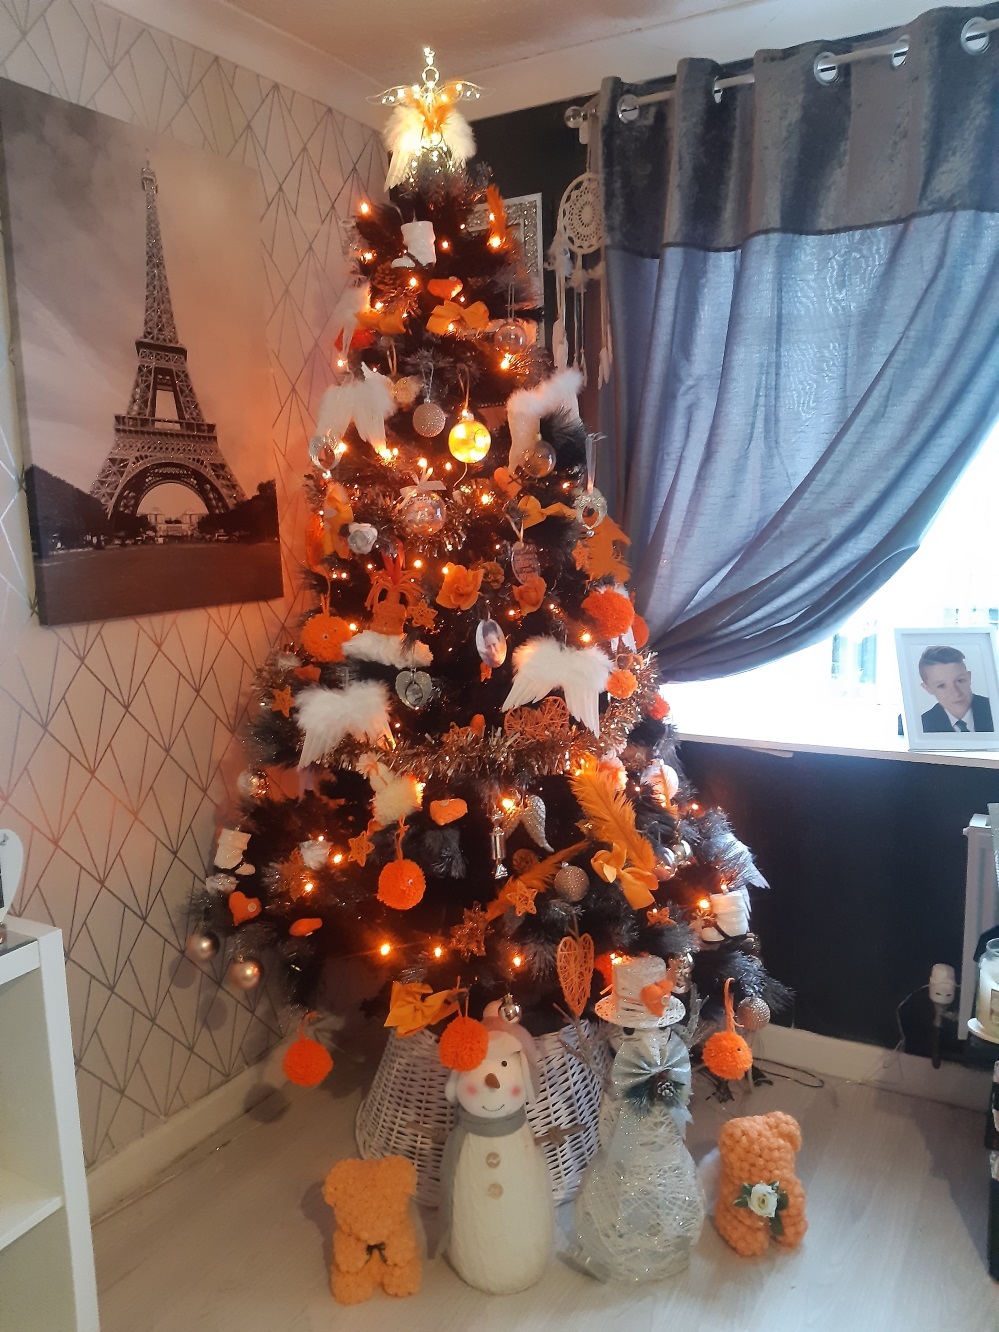 Louise has decorated her Christmas tree in orange in memory of Cason, known fondly as Ginge becasue of his red hair